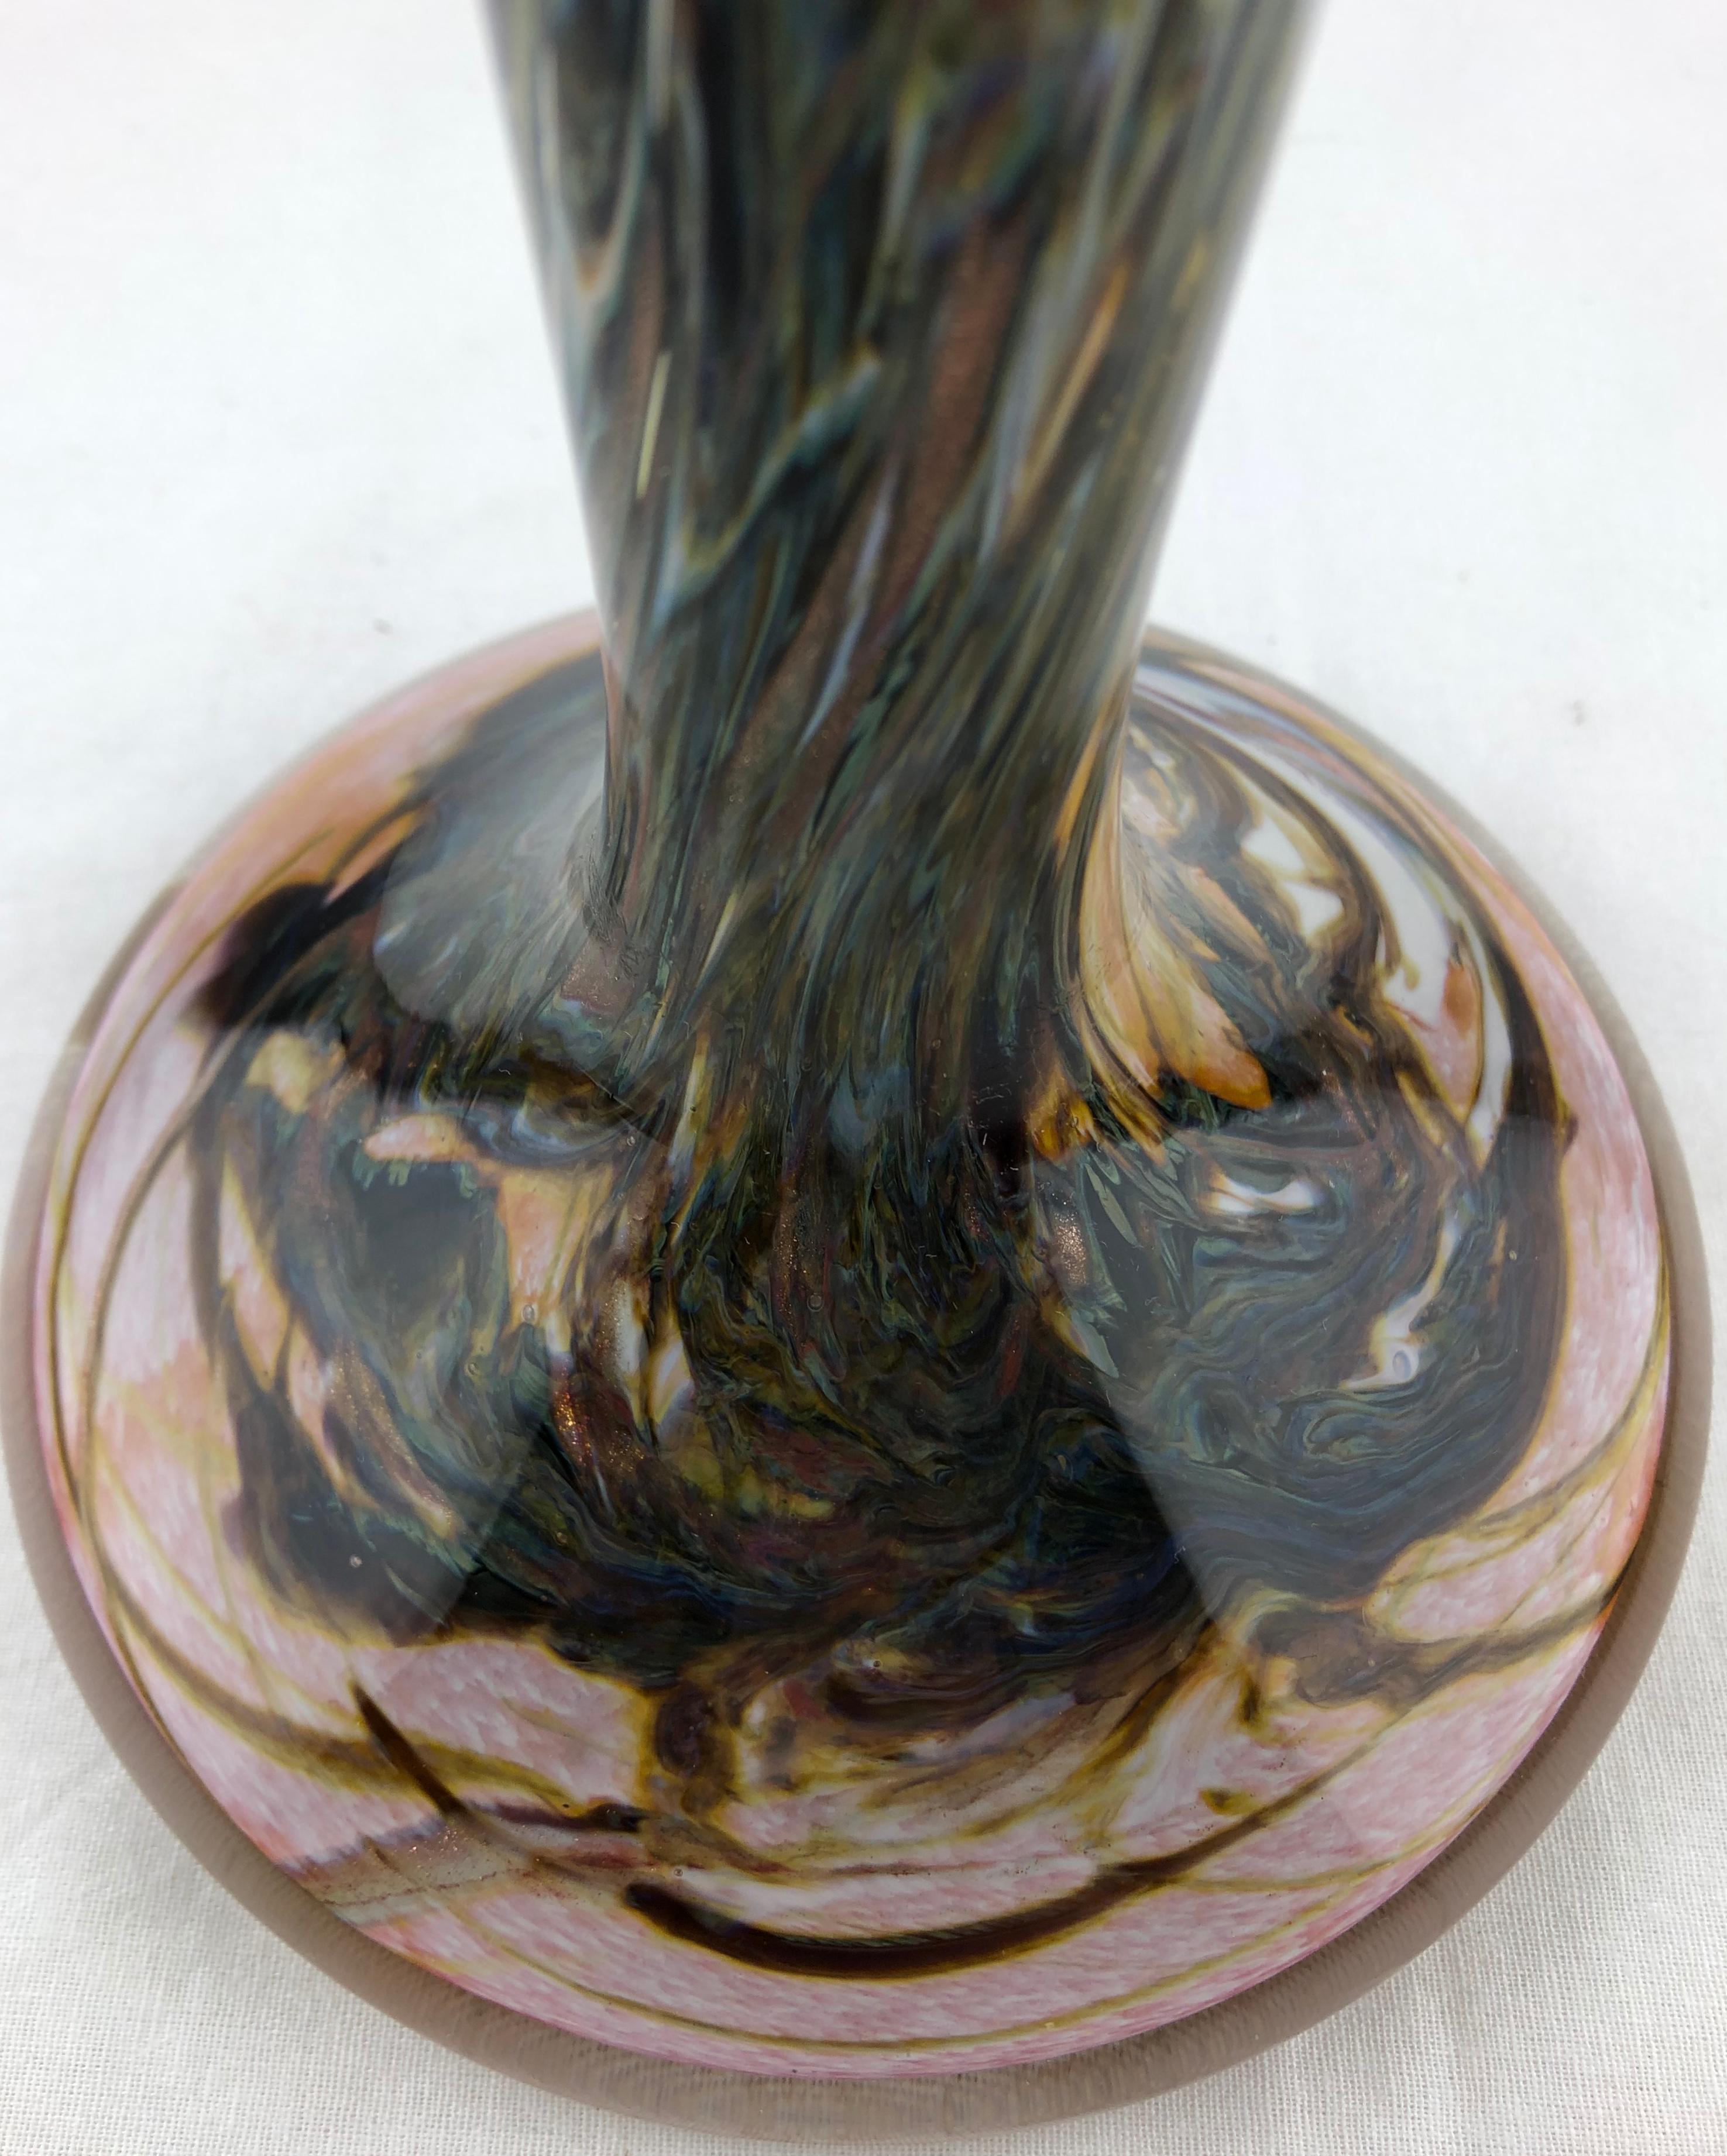 A unique and rare handcrafted vase by Michele Luzoro, known as the 